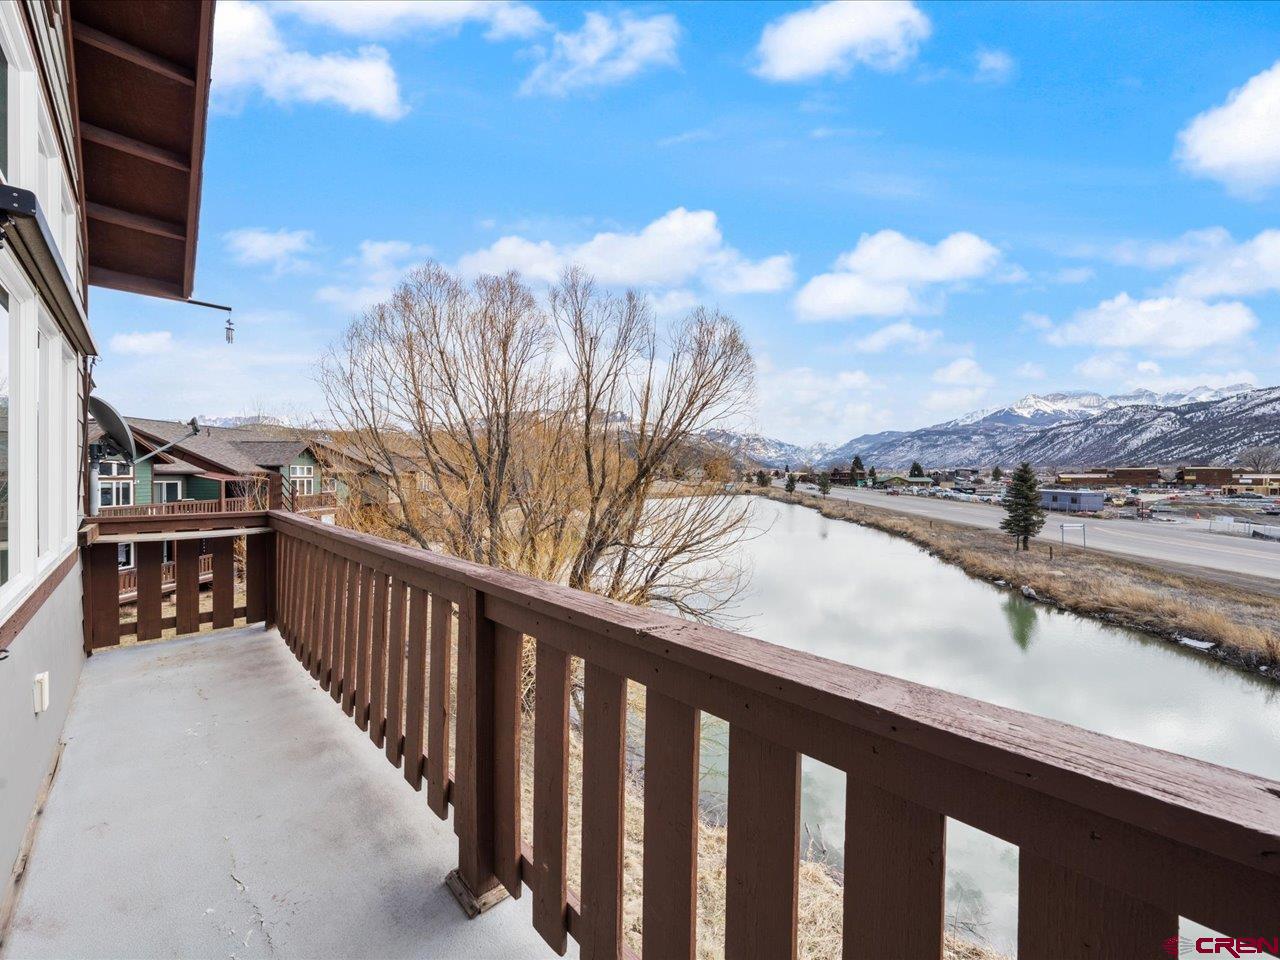 "Million Dollar Views" for far less! Don't miss out on a chance to live in beautiful Ridgway, Colorado with this prime location condo. Plucked first from all of the possible units, because when you see the view, you'll understand why. This well-maintained unit boasts nice appliances, including a brand-new microwave, an open feel with those views, and granite countertops. The carpet was replaced throughout, and the hot water heater is new within the last three years. All the things you want in a condo- gas forced air heat, a stackable washer and dryer in an actual laundry room, and an ideal carport spot and outdoor storage space included to keep some snow off your vehicle and your outdoor gear protected. This unit hasn't been available since it was built.